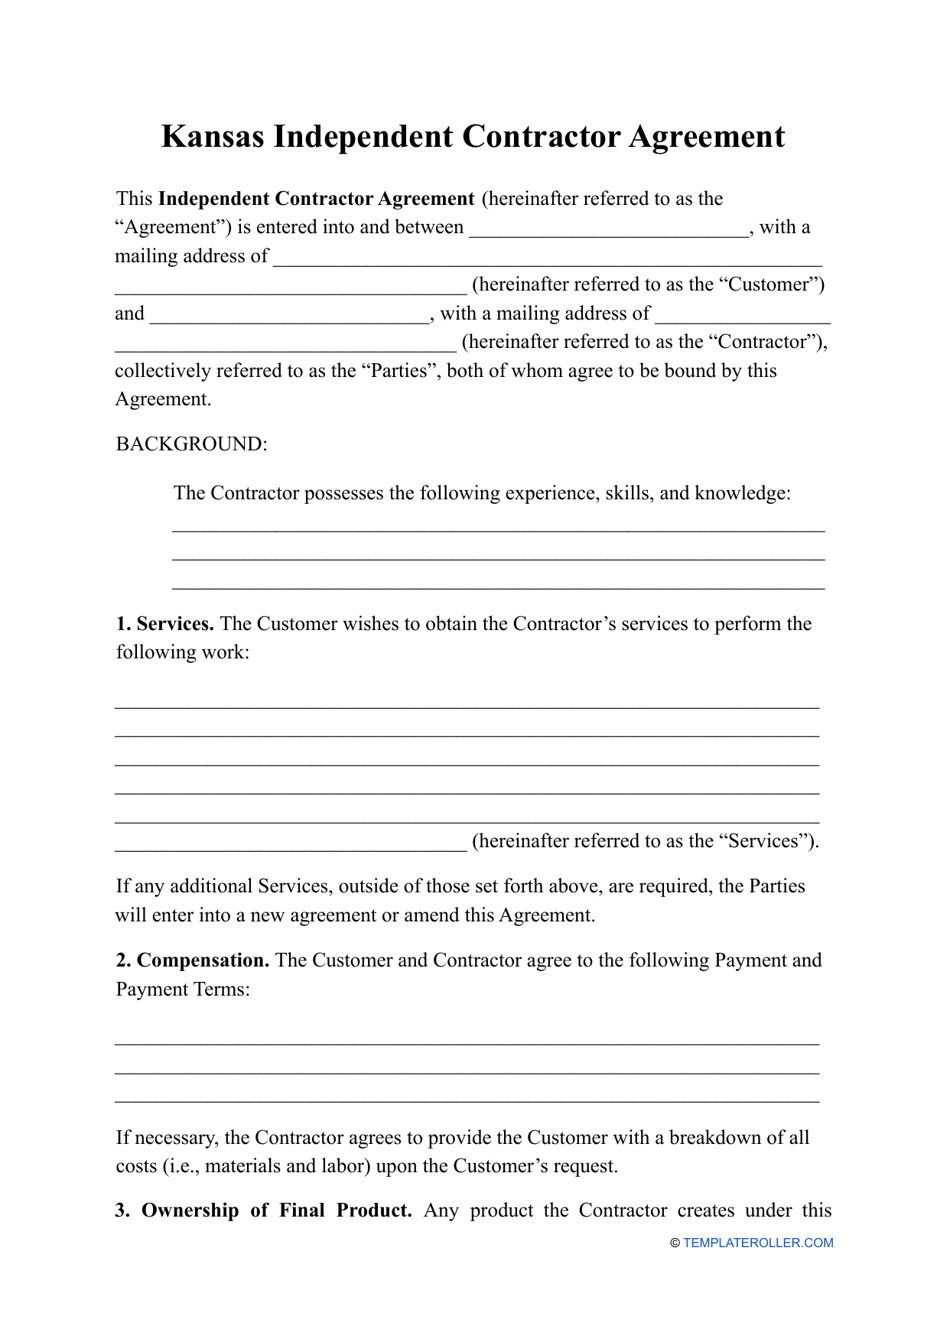 Independent Contractor Agreement Template - Kansas, Page 1